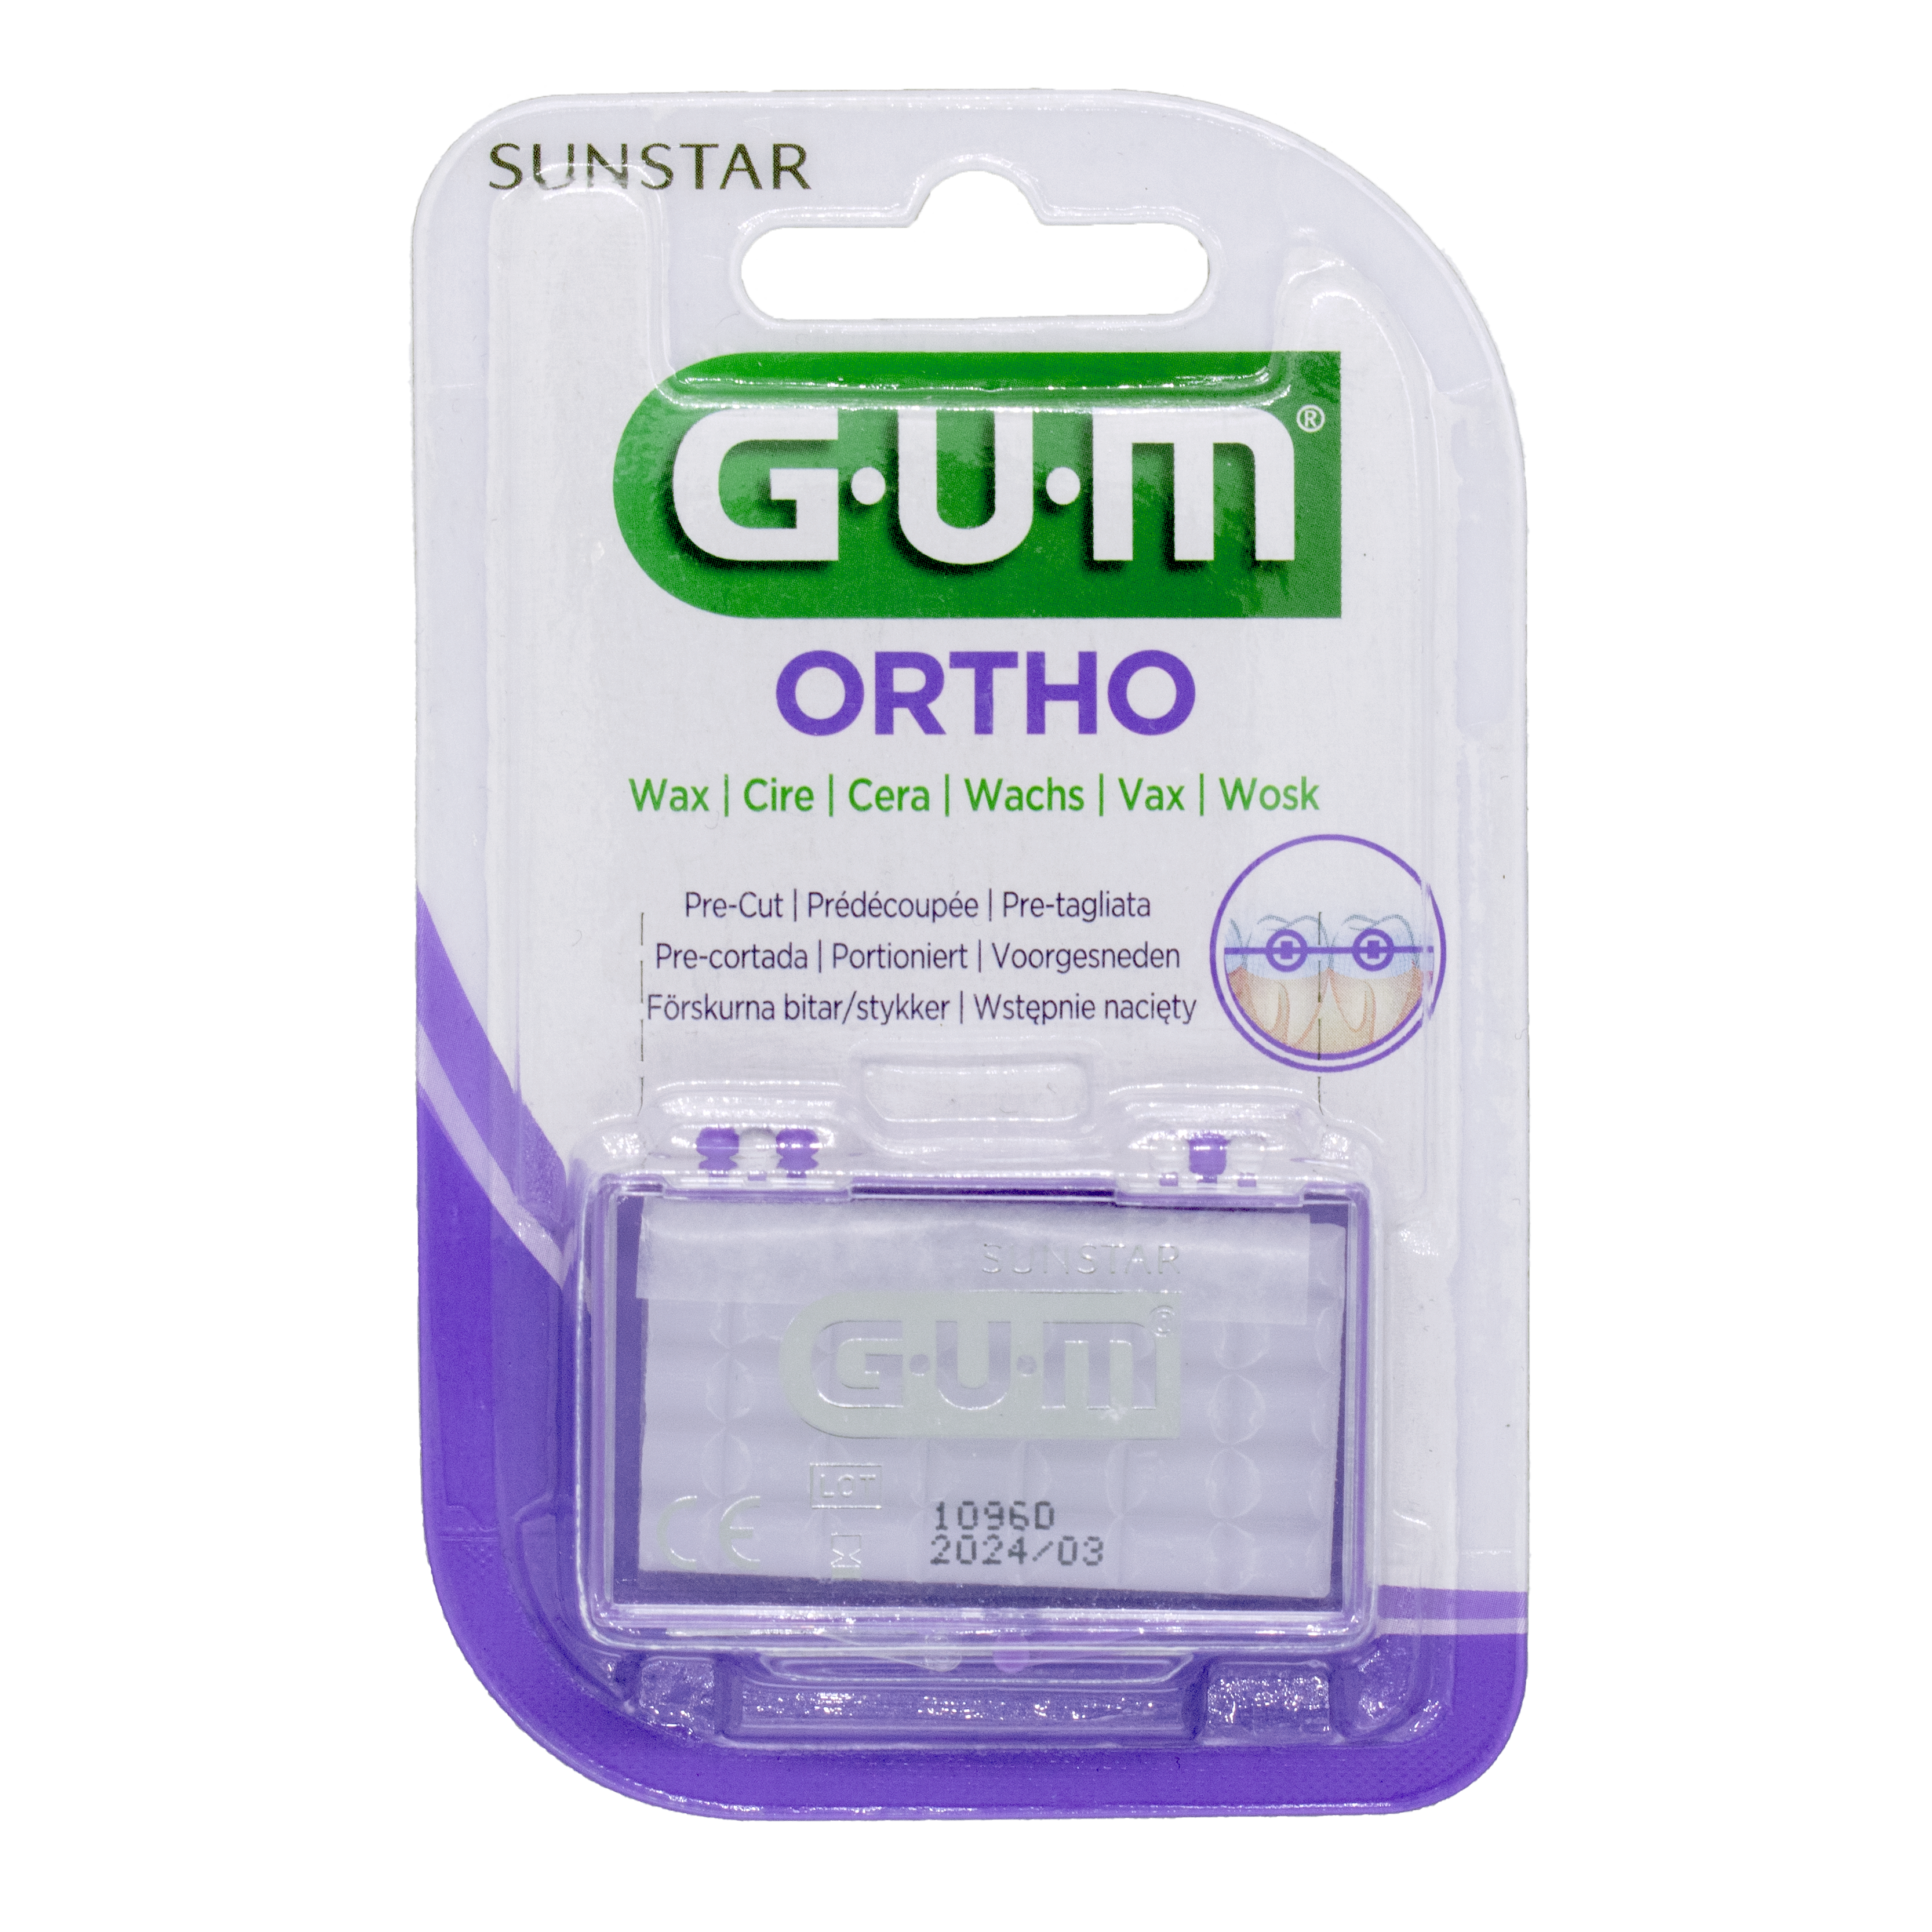 GUM ORTHO Wax | Protects Against Pain Caused By Braces | Pre-cut Wax